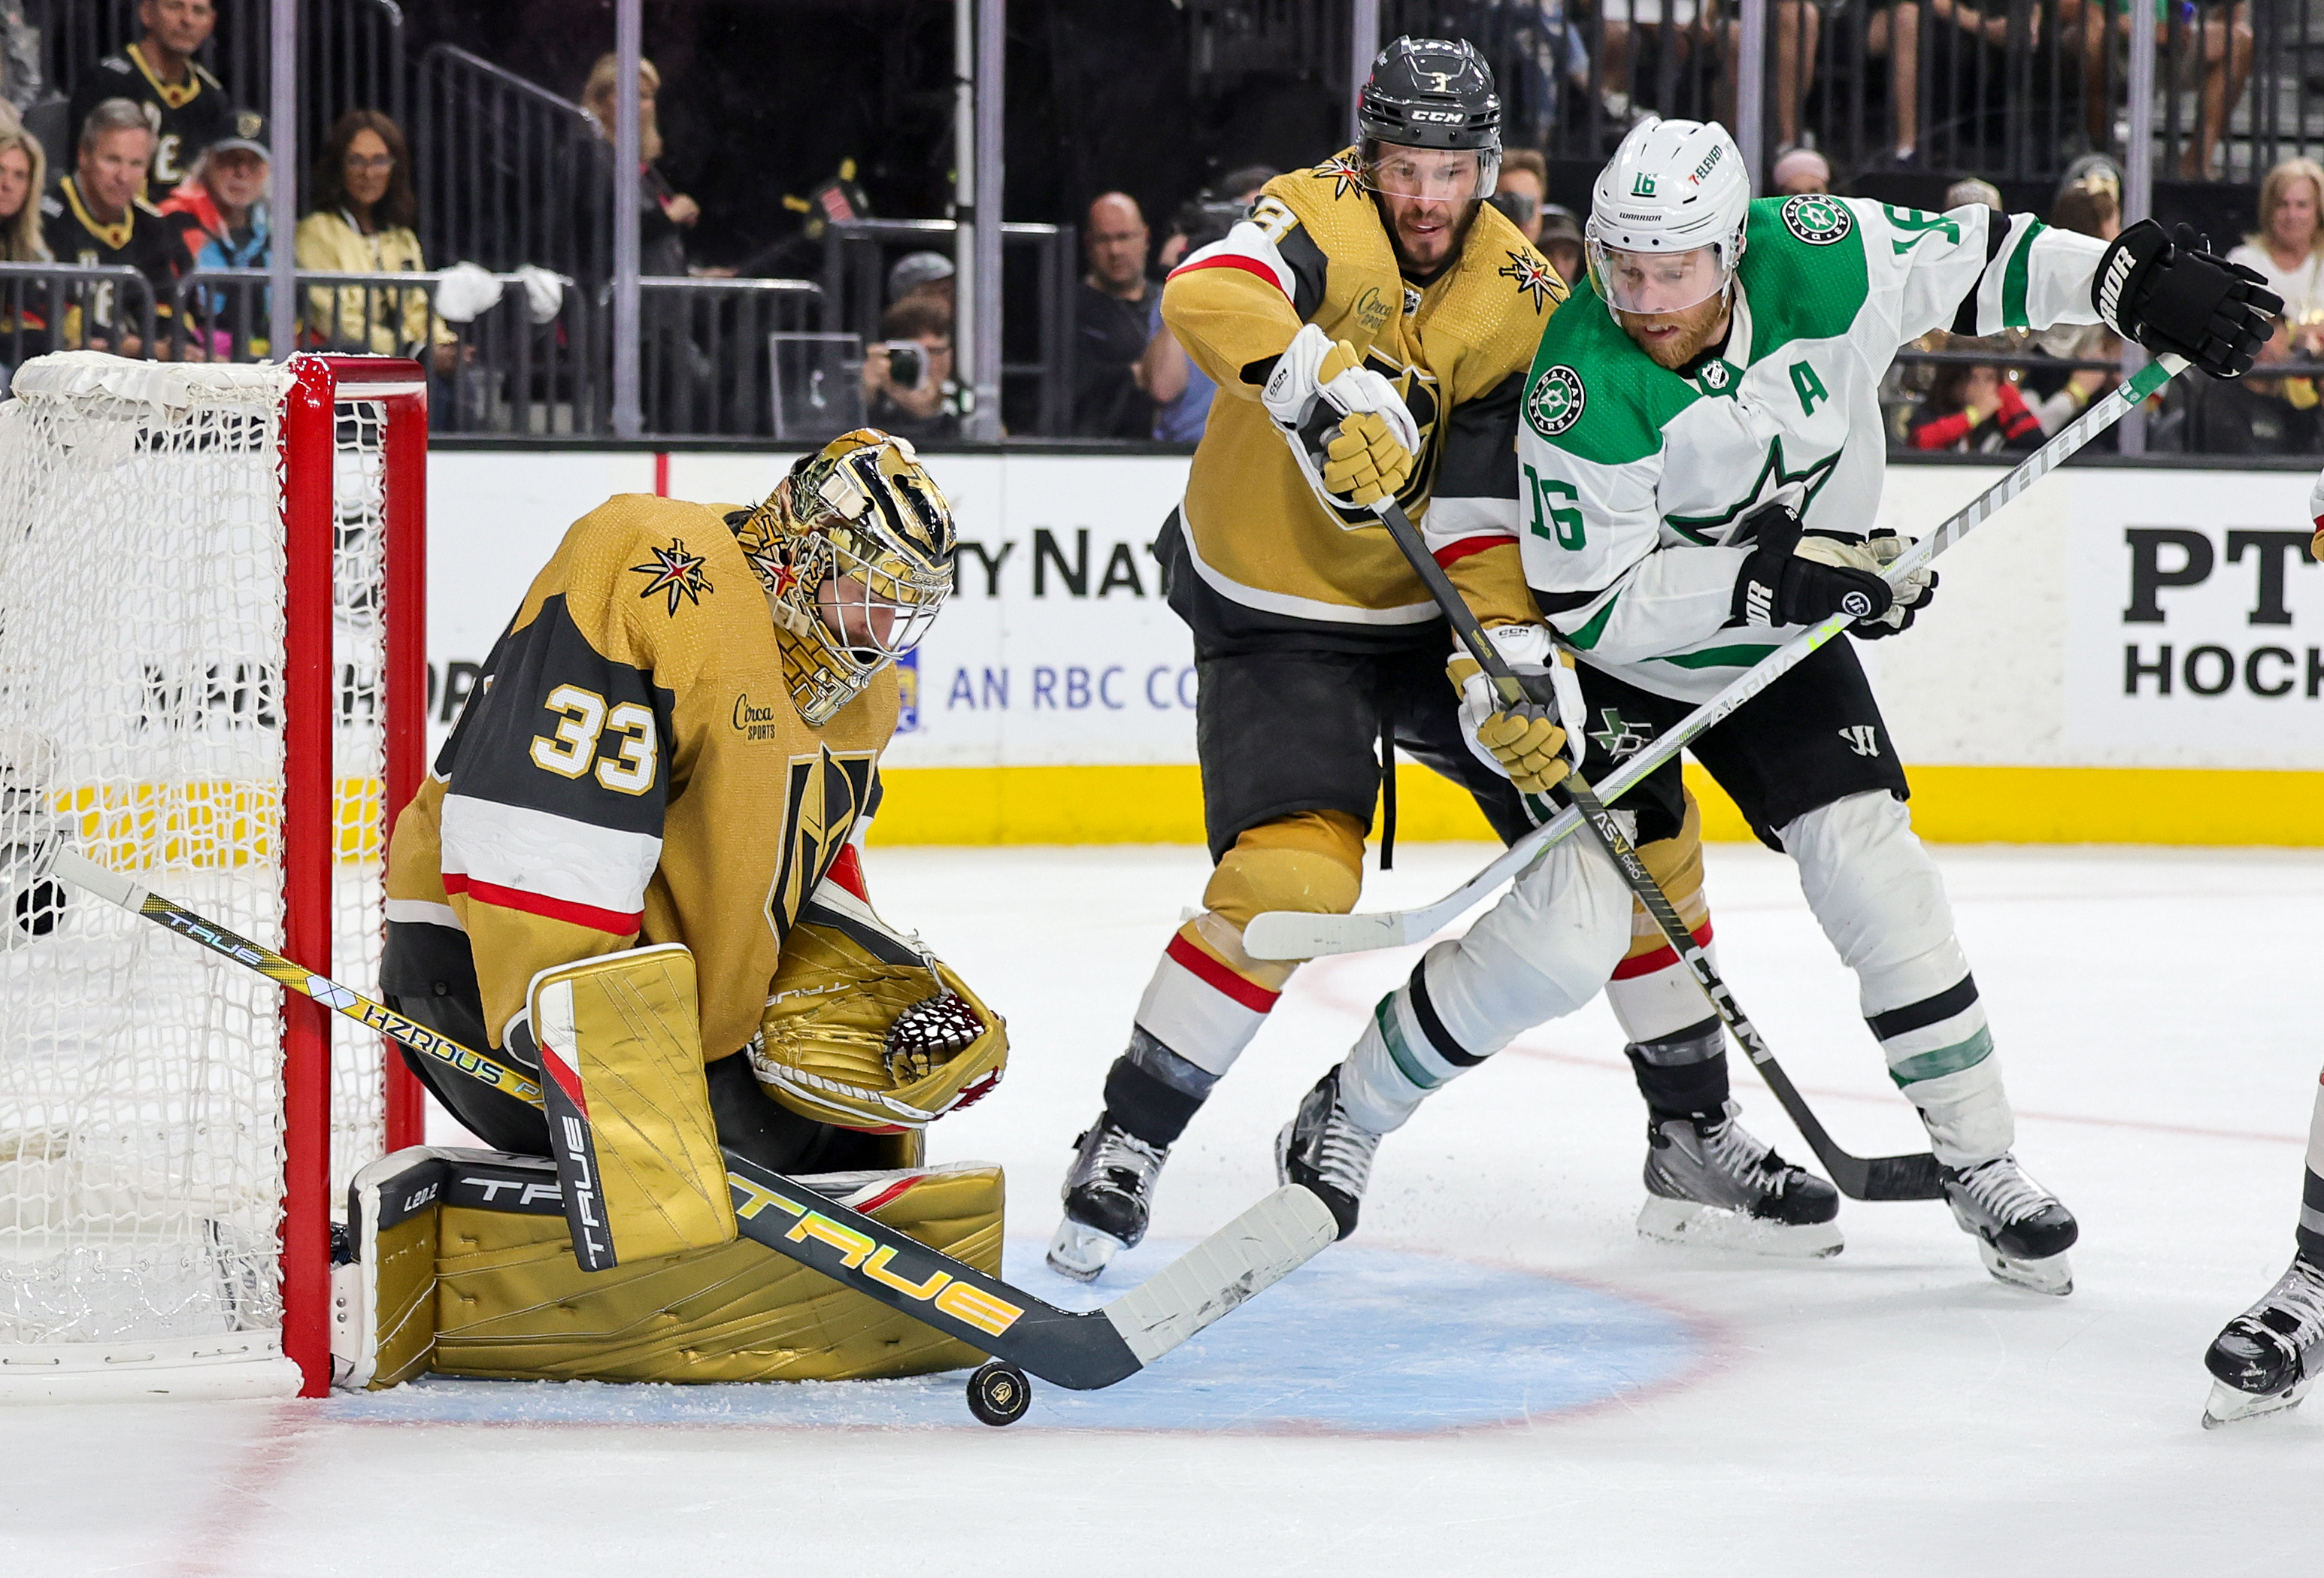 Adin Hill of the Vegas Golden Knights makes a save as Brayden McNabb of the Golden Knights and Joe Pavelski of the Dallas Stars look for a rebound in the third period of Game Two of the Western Conference Final of the 2023 Stanley Cup Playoffs at T-Mobile Arena on May 21, 2023 in Las Vegas, Nevada. The Golden Knights defeated the Stars 3-2 in overtime.